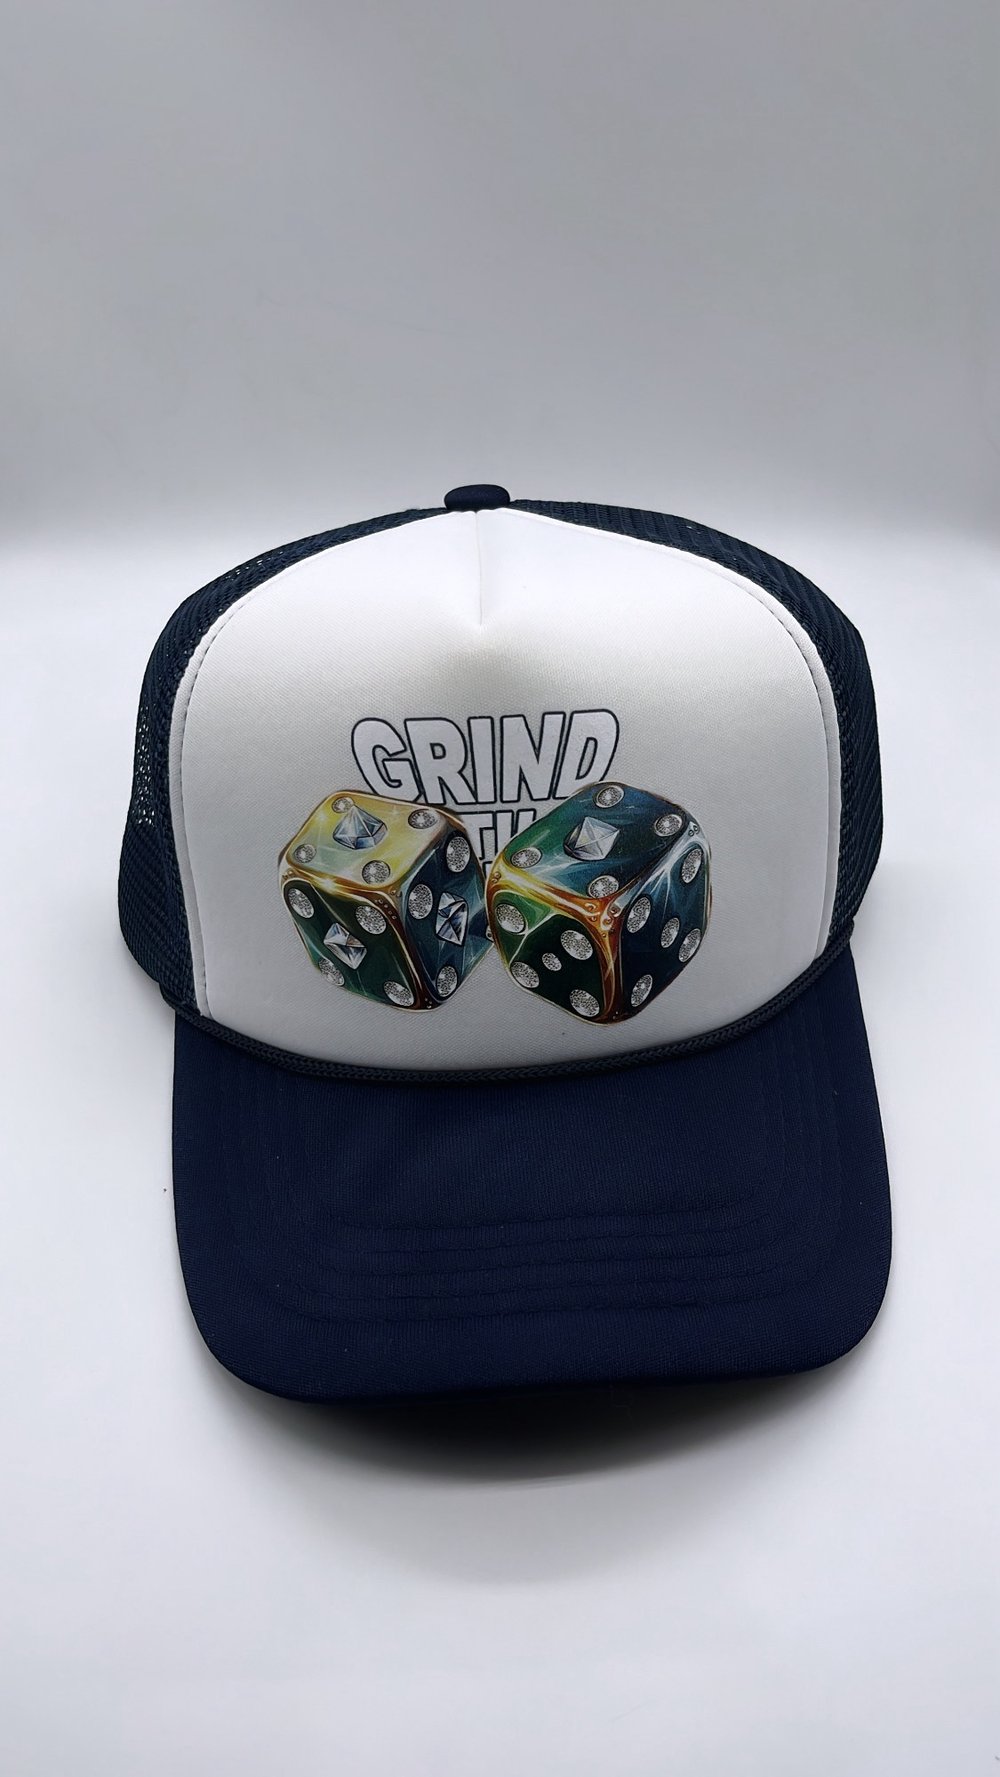 GUUD "Pair-A-Dice" Trucker Hat